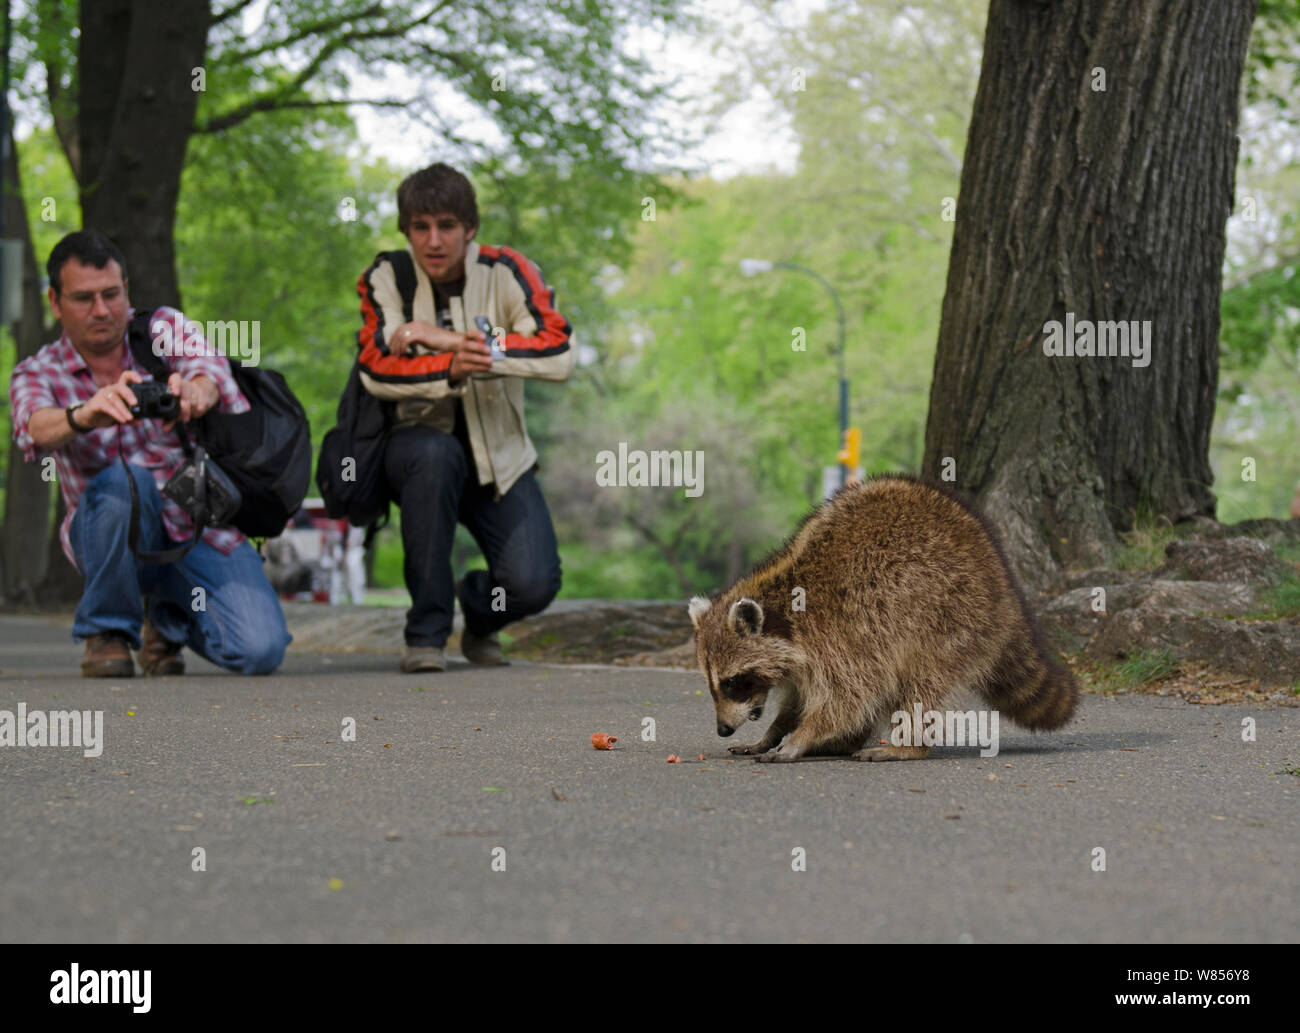 North American Racoon (Procyon lotor) with men trying to take photographs of it eating, Central Park New York City, USA, May Stock Photo